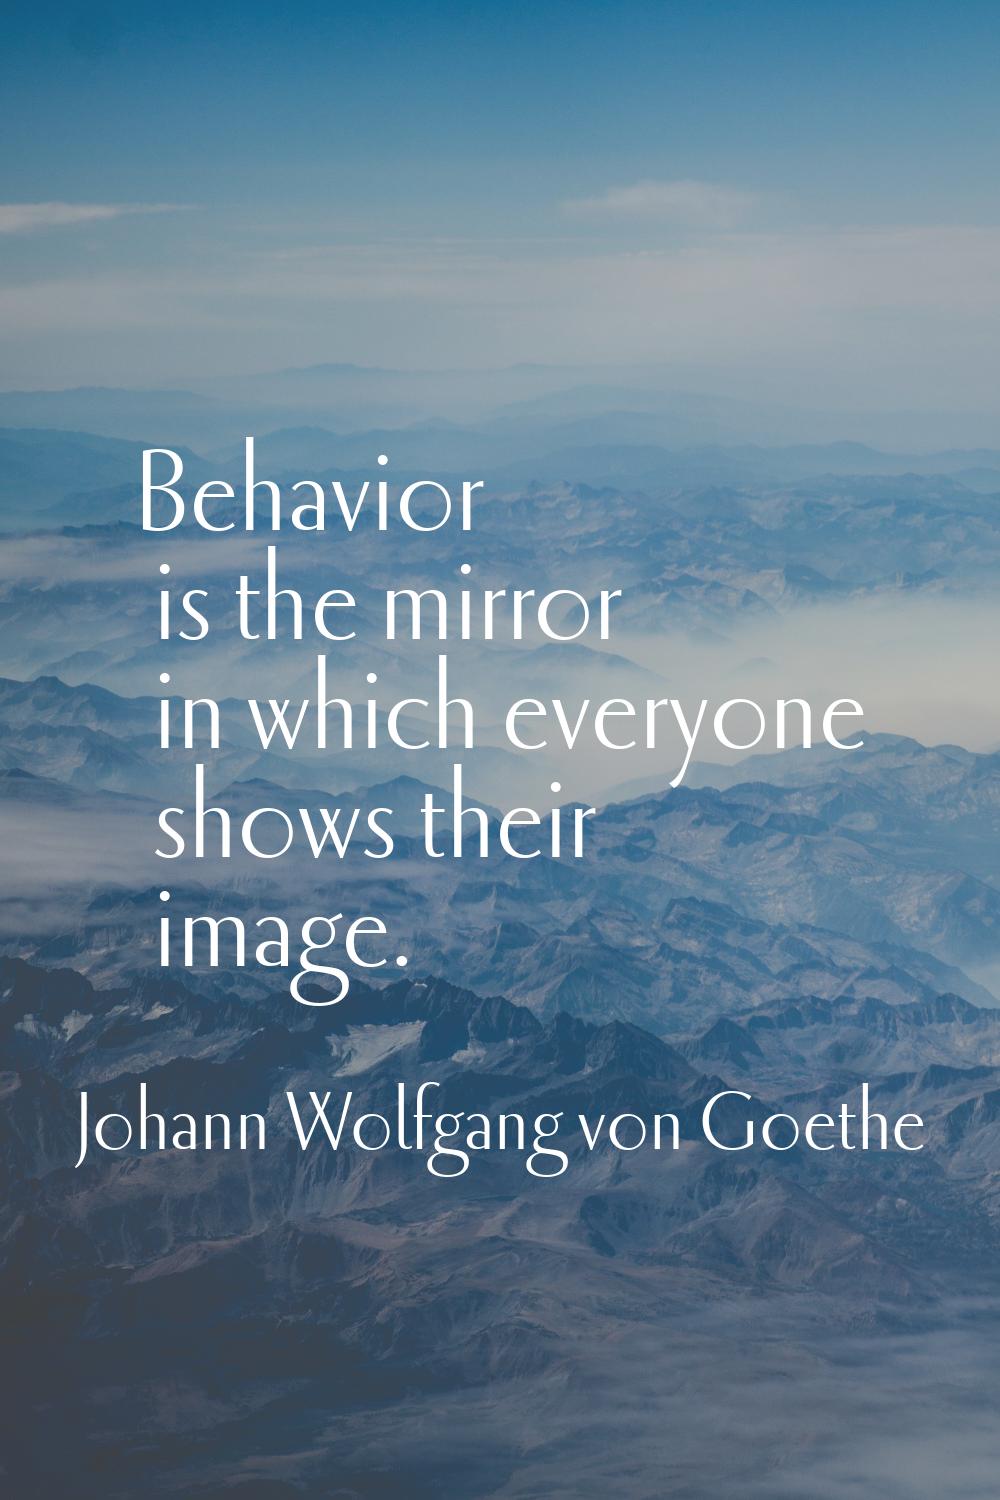 Behavior is the mirror in which everyone shows their image.